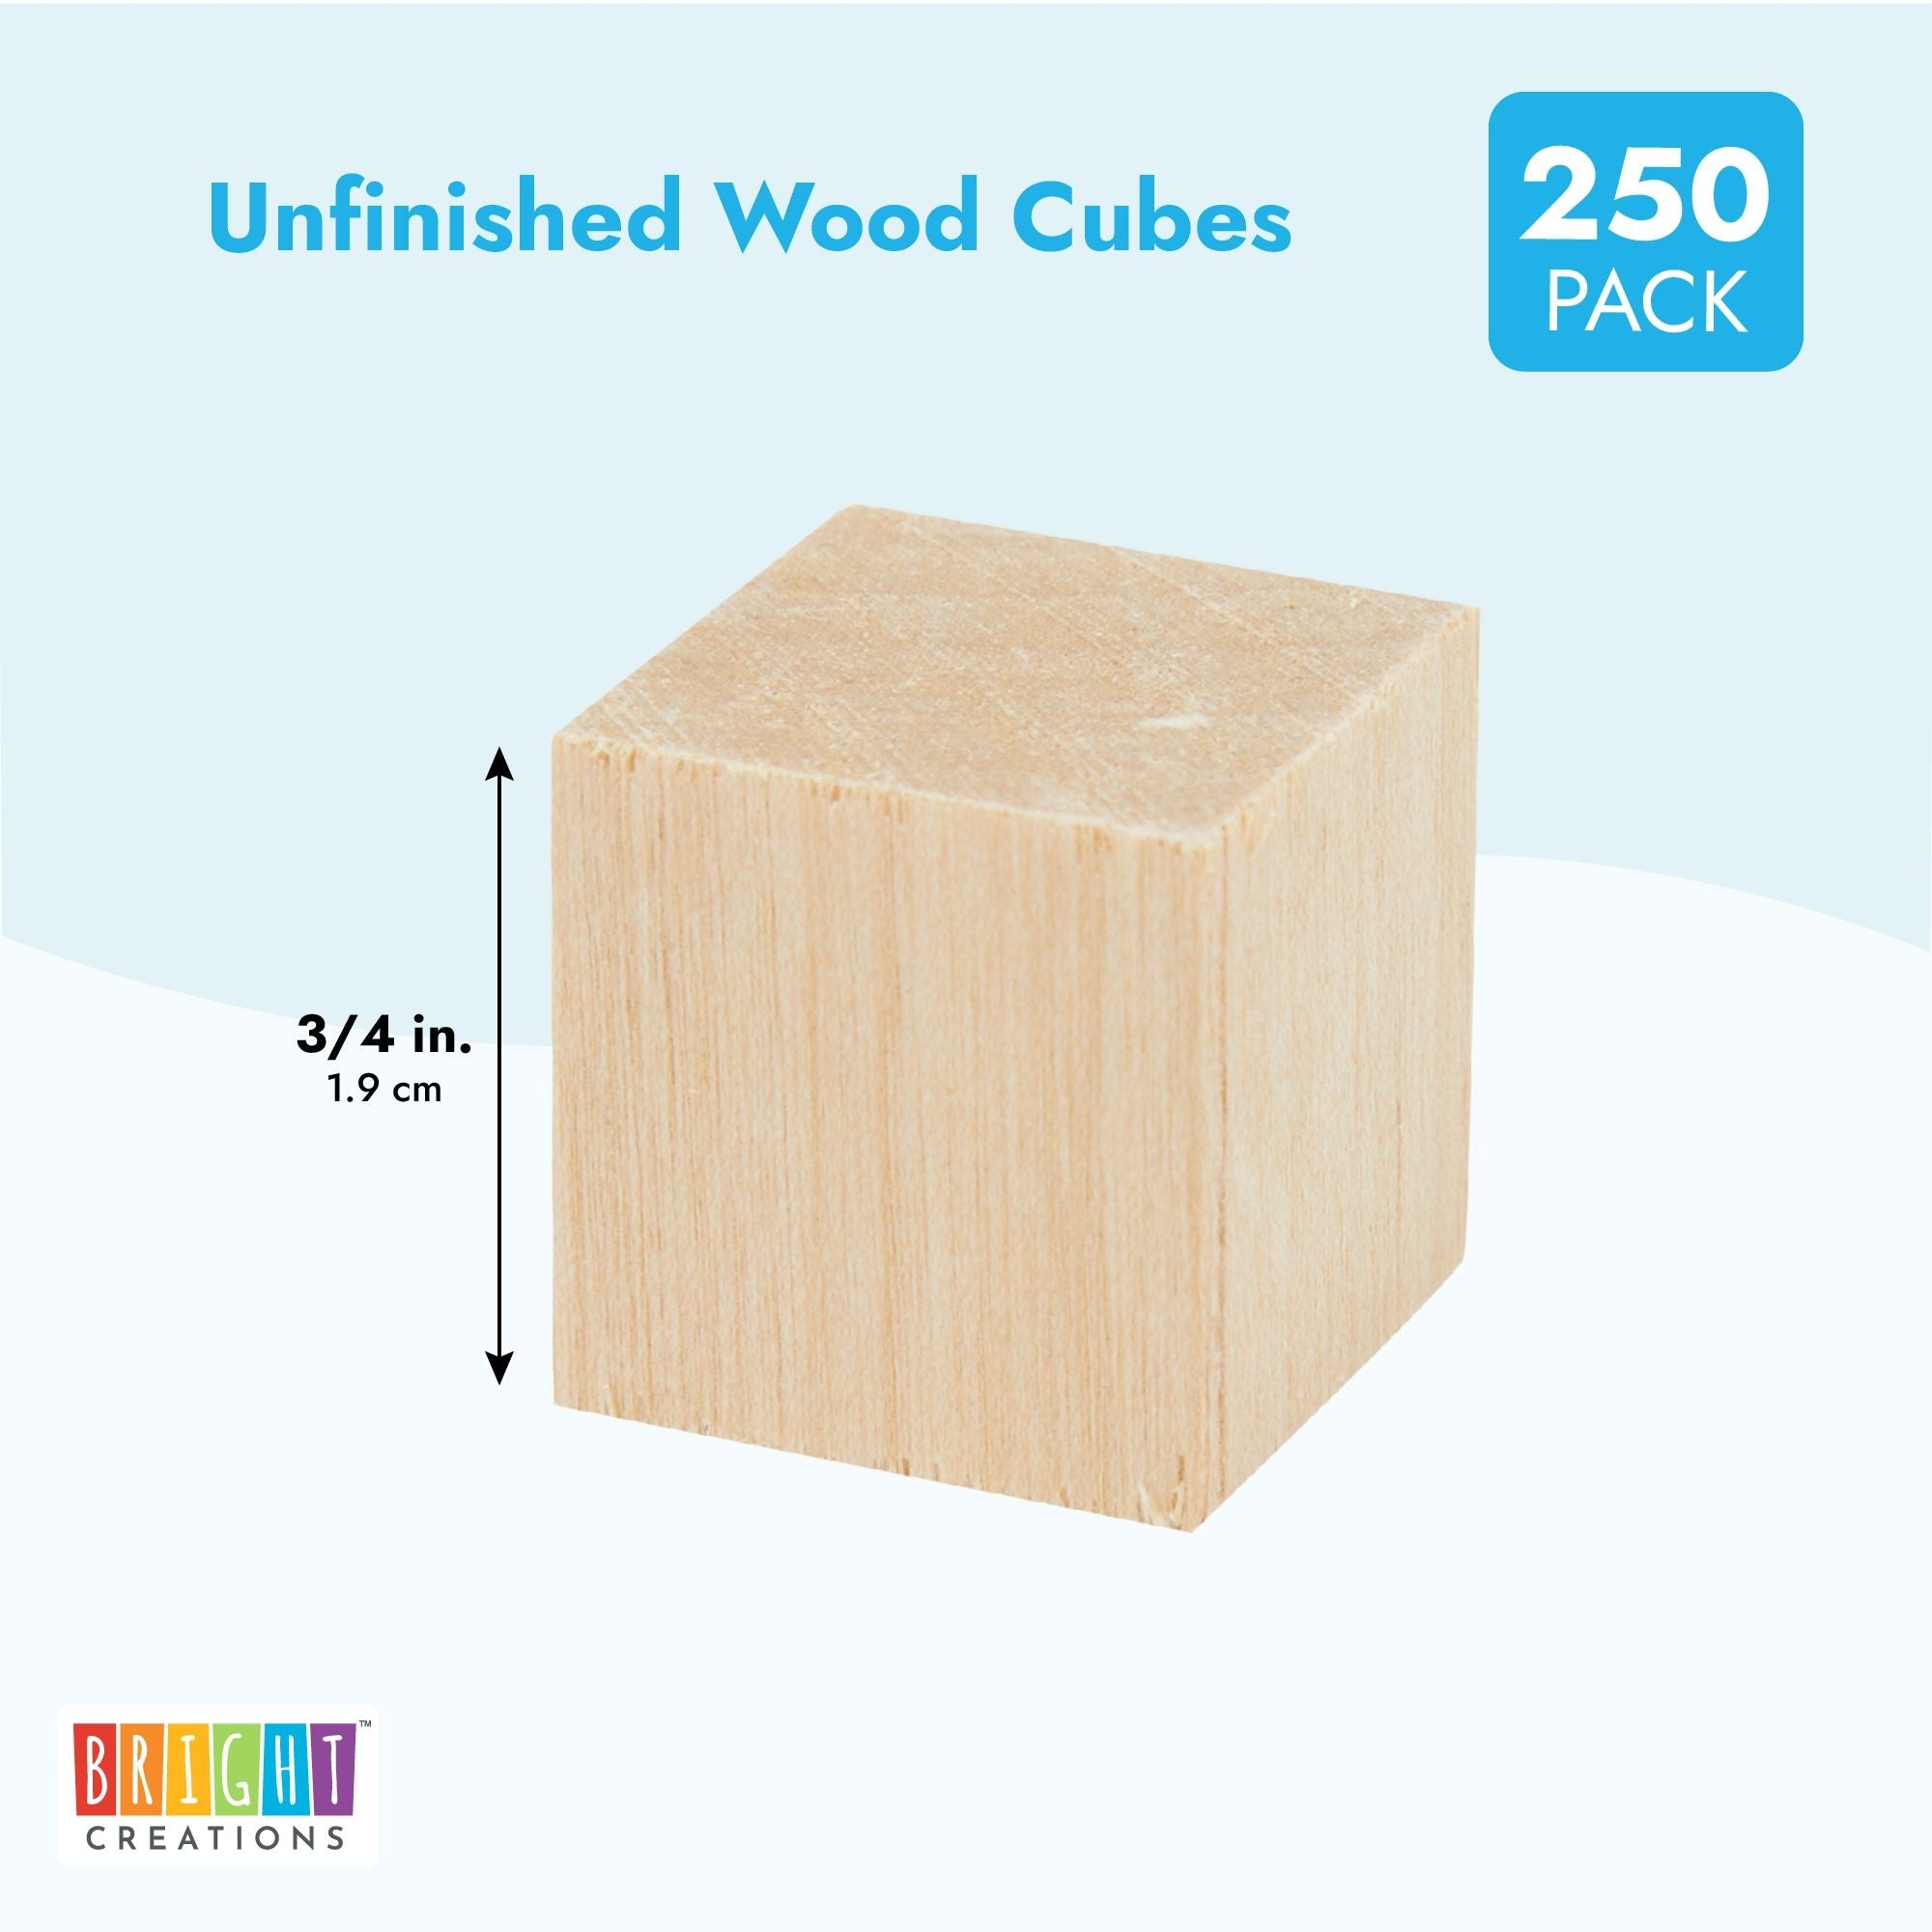 Bright Creations 250 Pack Unfinished Wood Cubes for Crafts, 3/4 In Wooden  Block Set